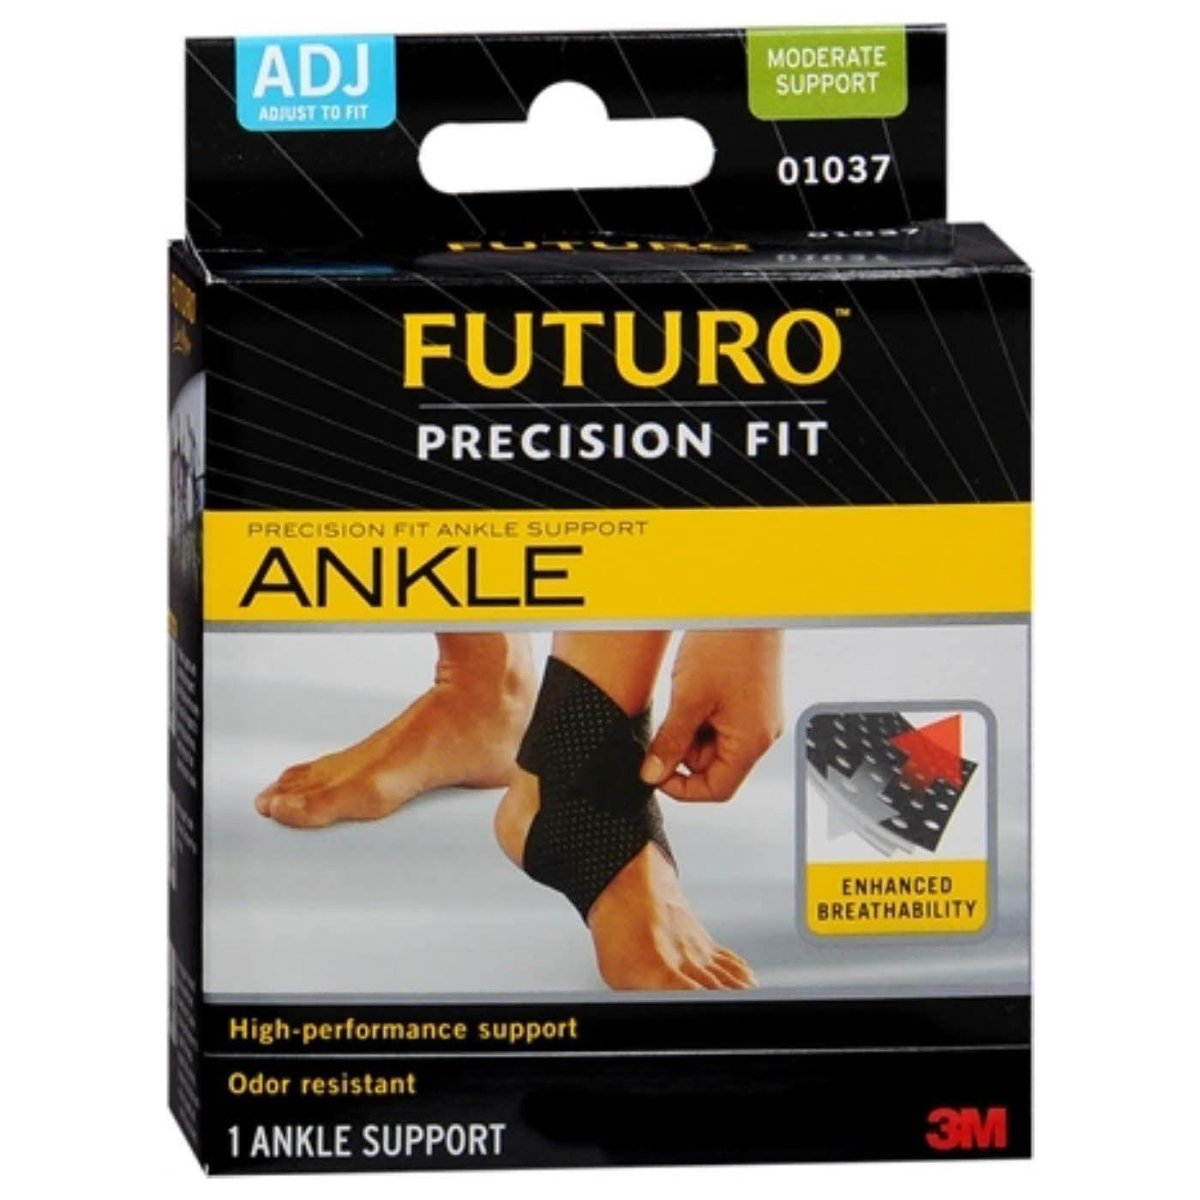 Futuro Precision Fit Ankle Support - Adjustable-Supports-Pro Sports